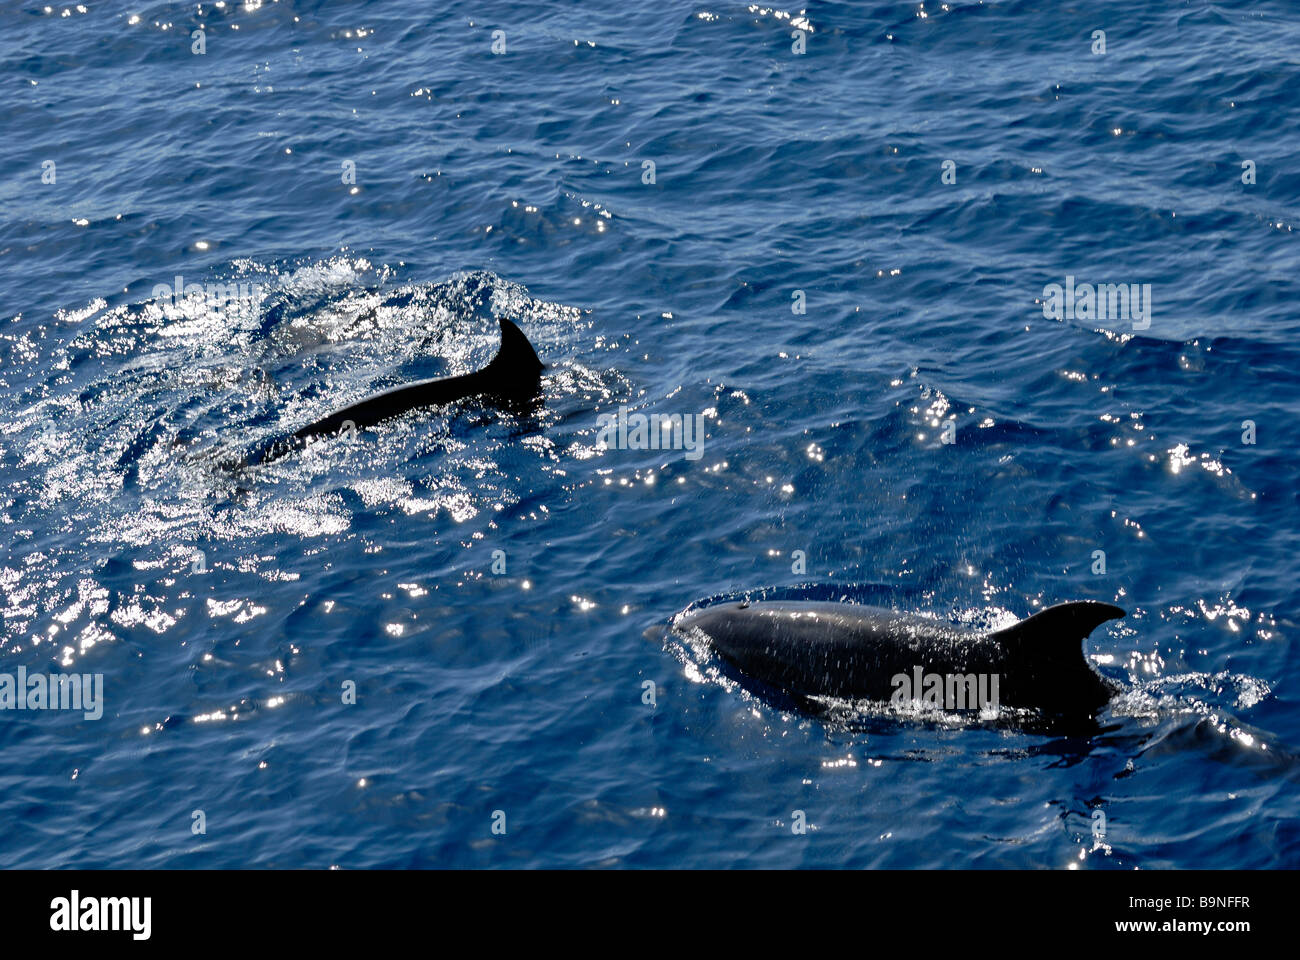 The Atlantic Spotted Dolphins, Stenella Frontalis, found on the dolphin search trip. Puerto Rico, Gran Canaria, Canary Islands, Stock Photo